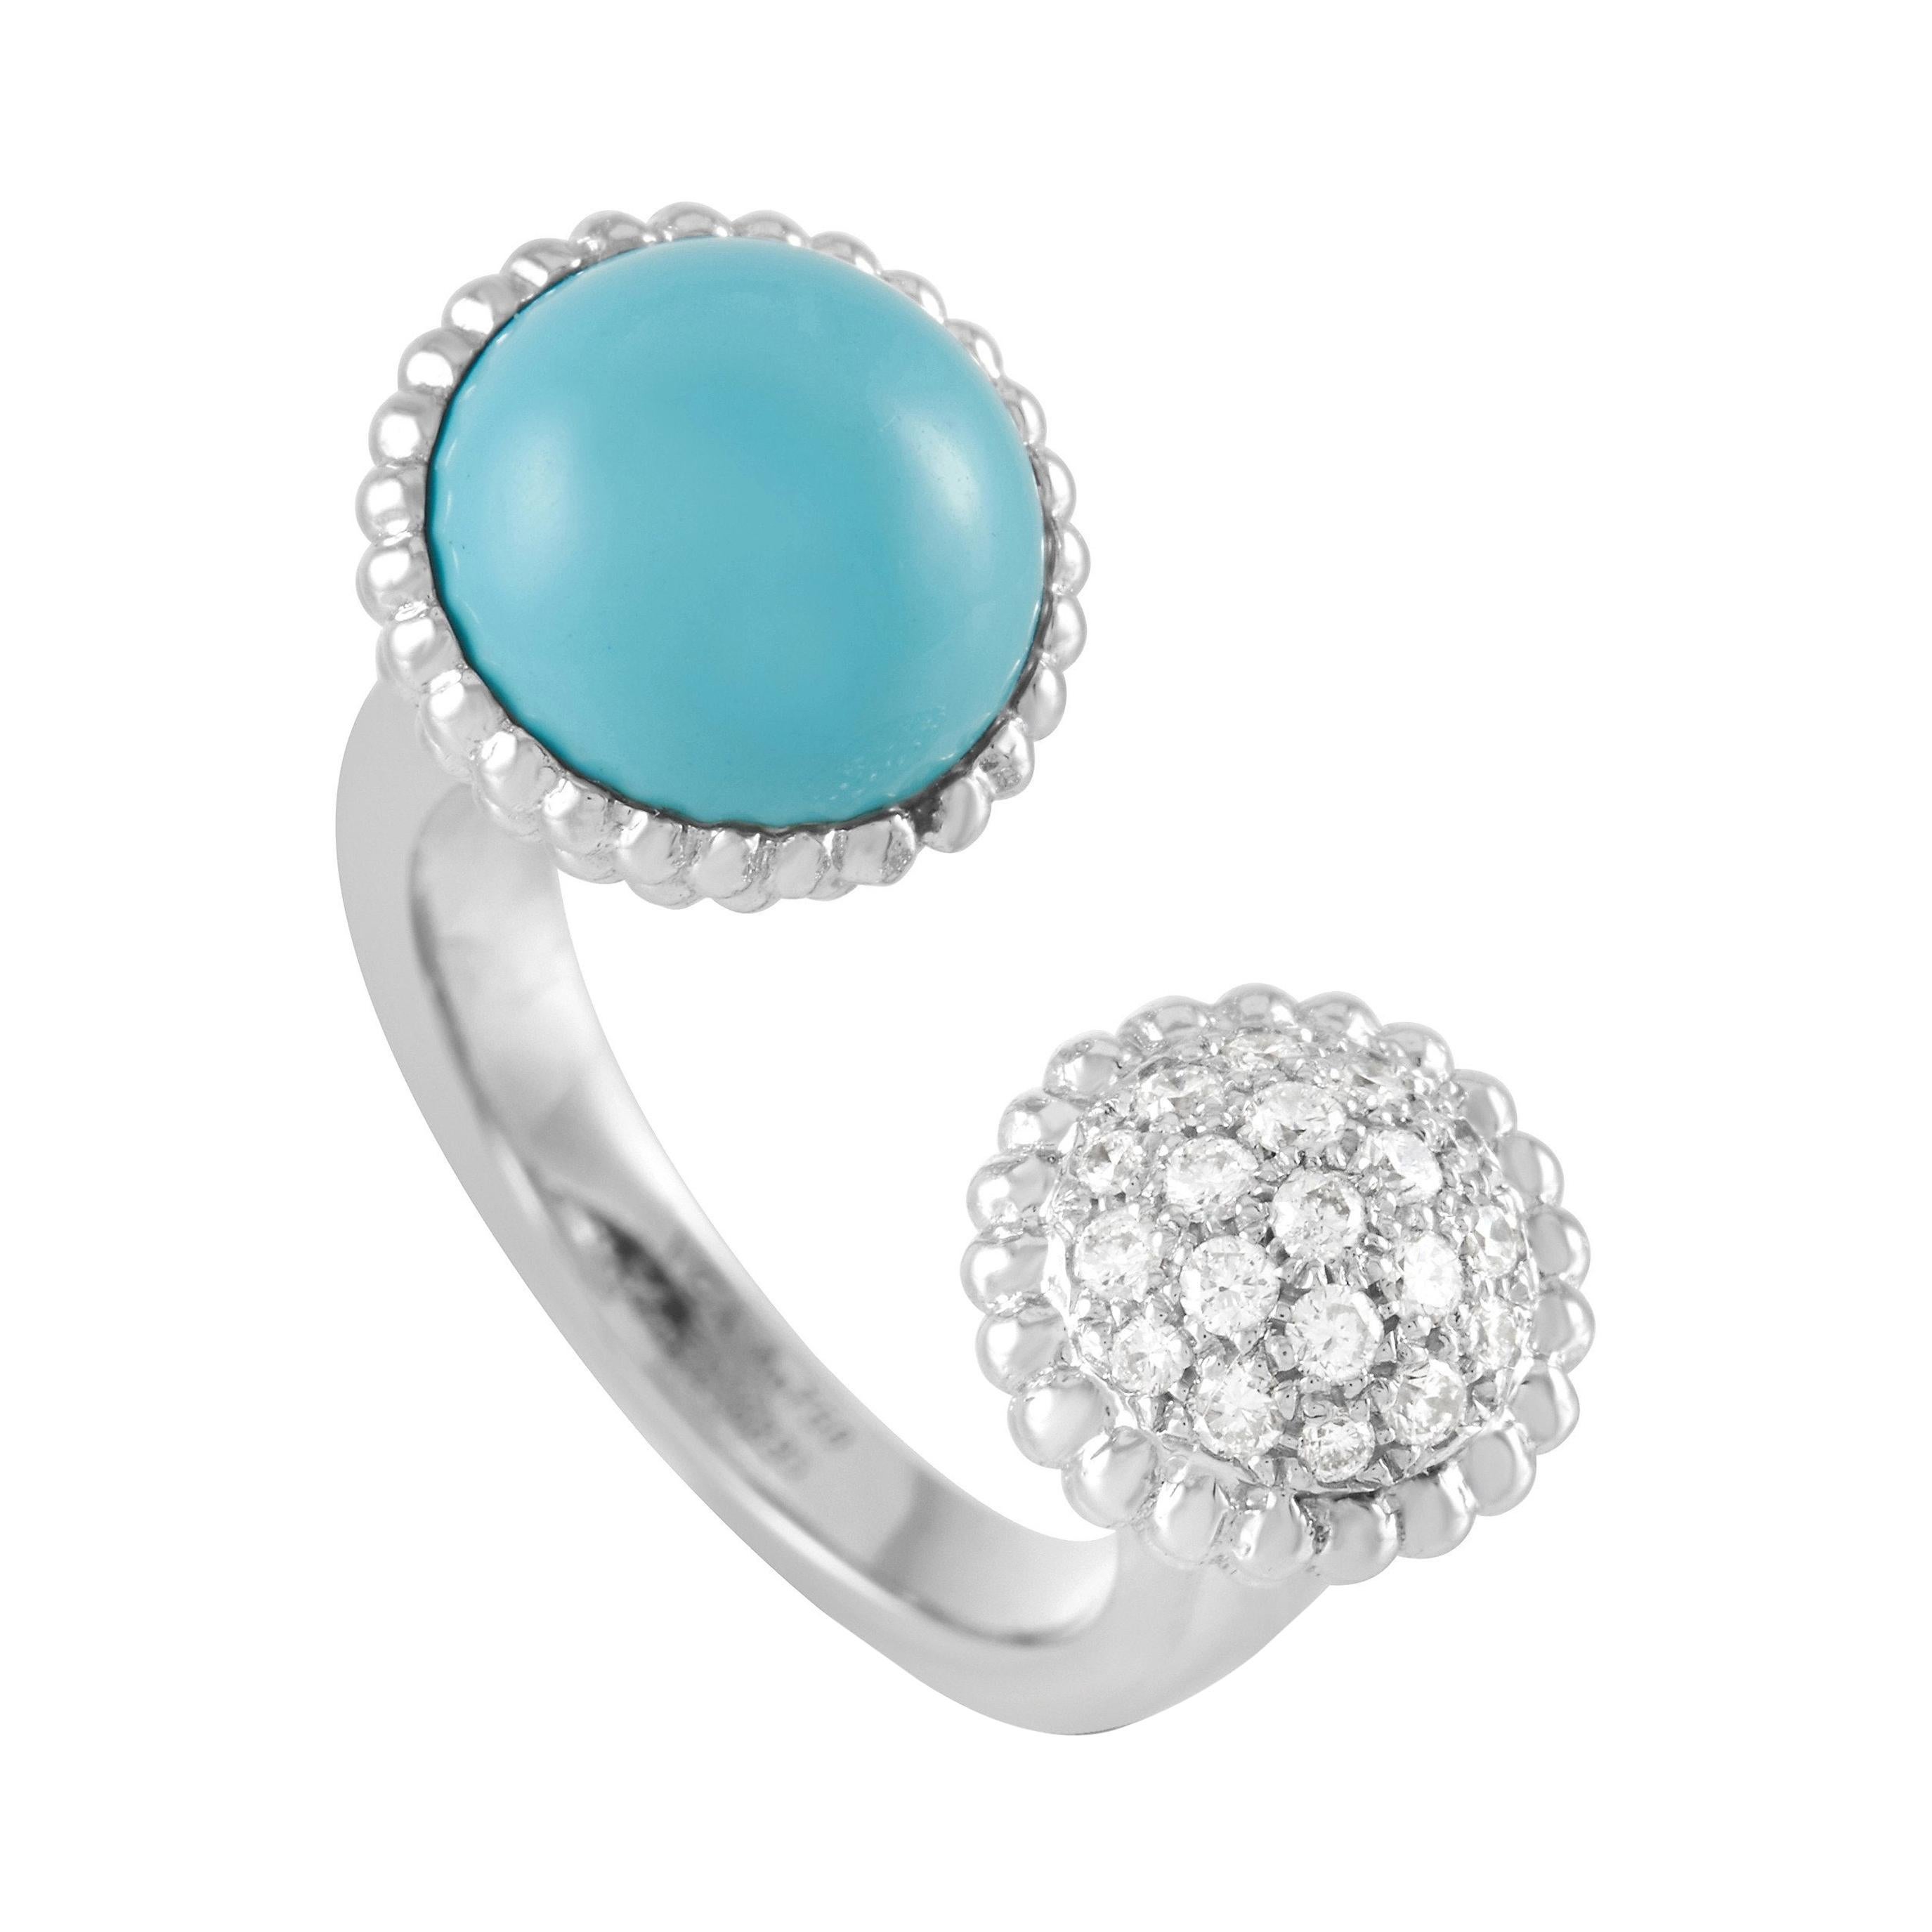 Van Cleef & Arpels Perlée 18K White Gold Diamond and Turquoise Statement Ring